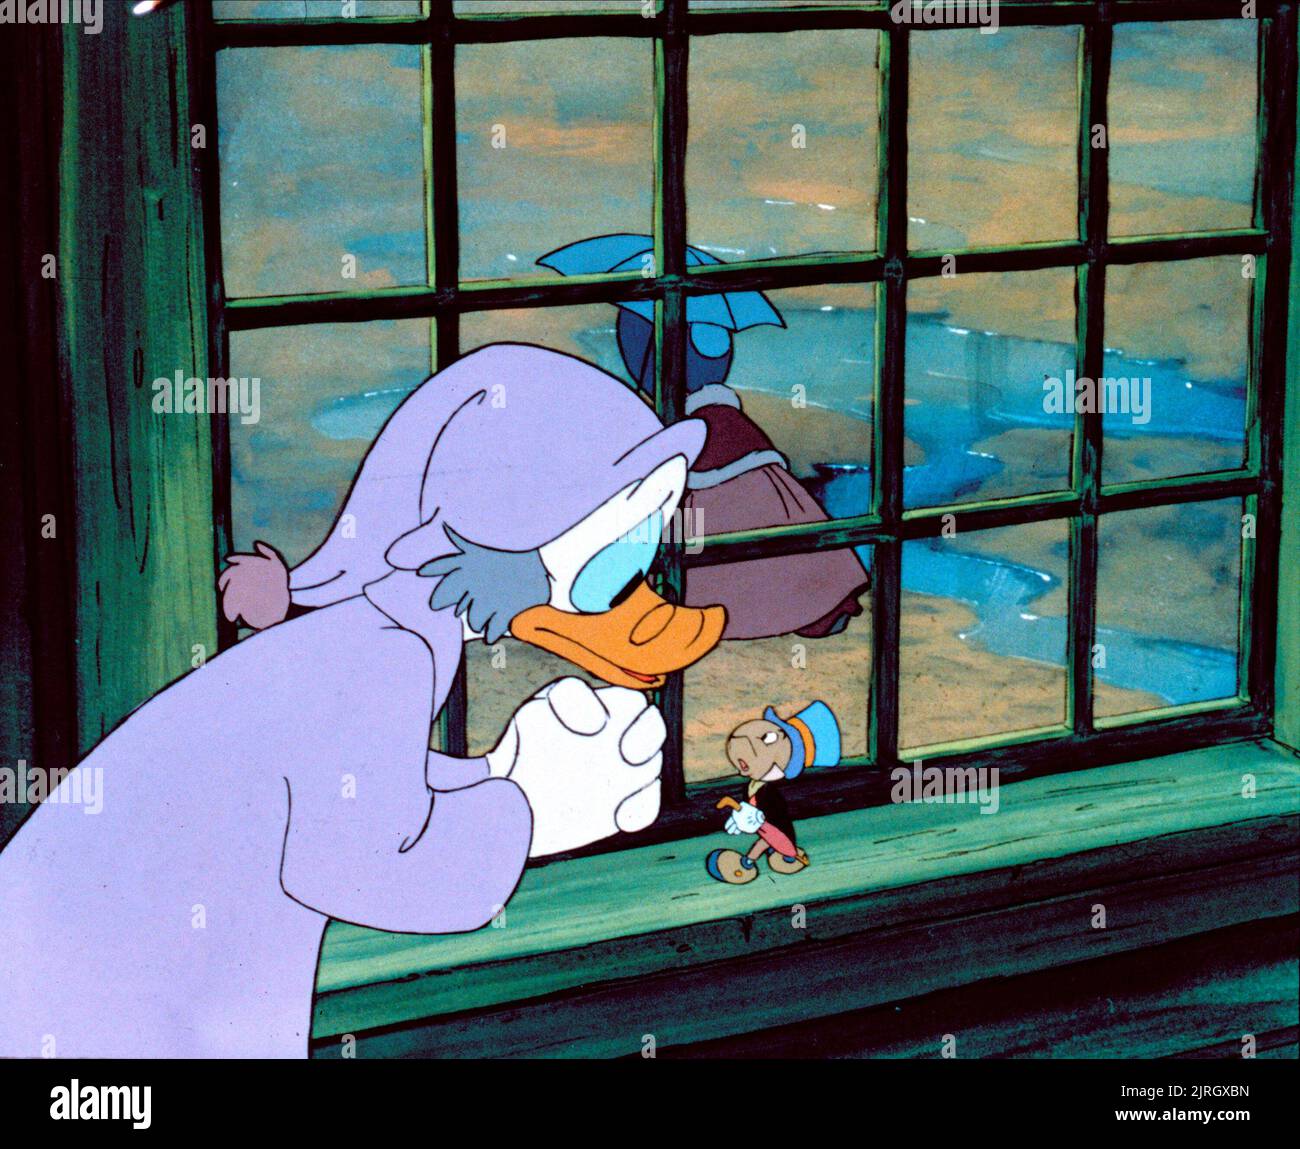 Oncle Picsou, Jiminy Cricket, MICKEY'S CHRISTMAS CAROL, 1983 Banque D'Images